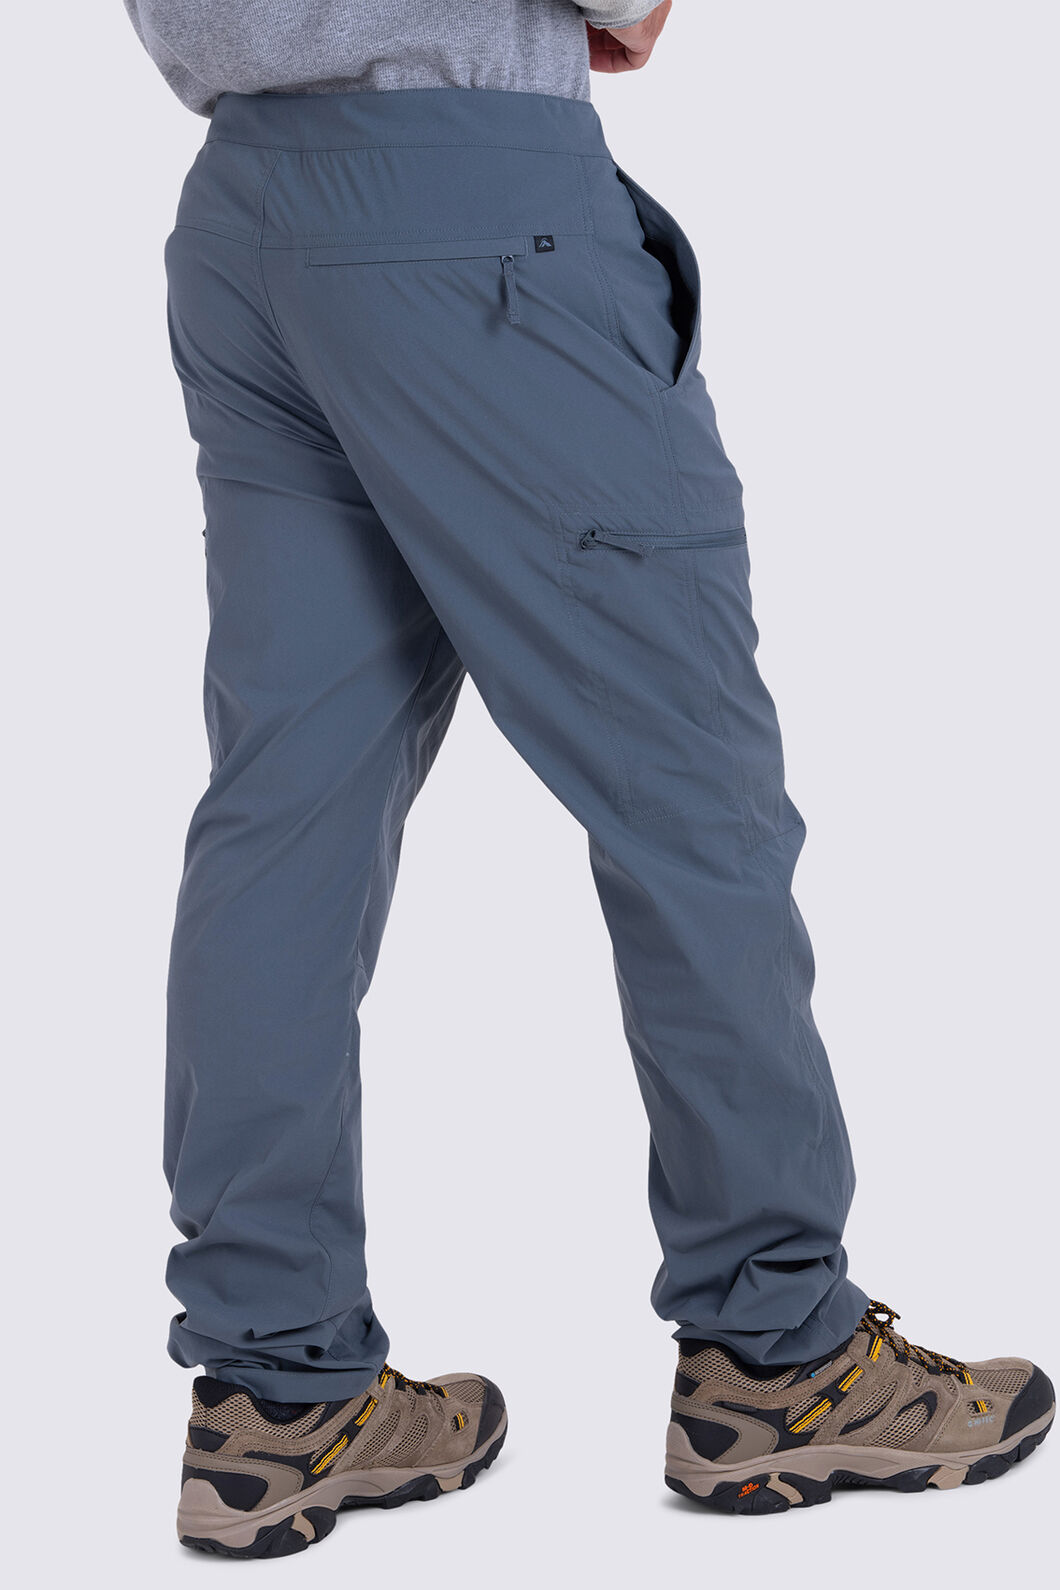 Men’s Airplane Travel Pant made with Organic Cotton | Pact